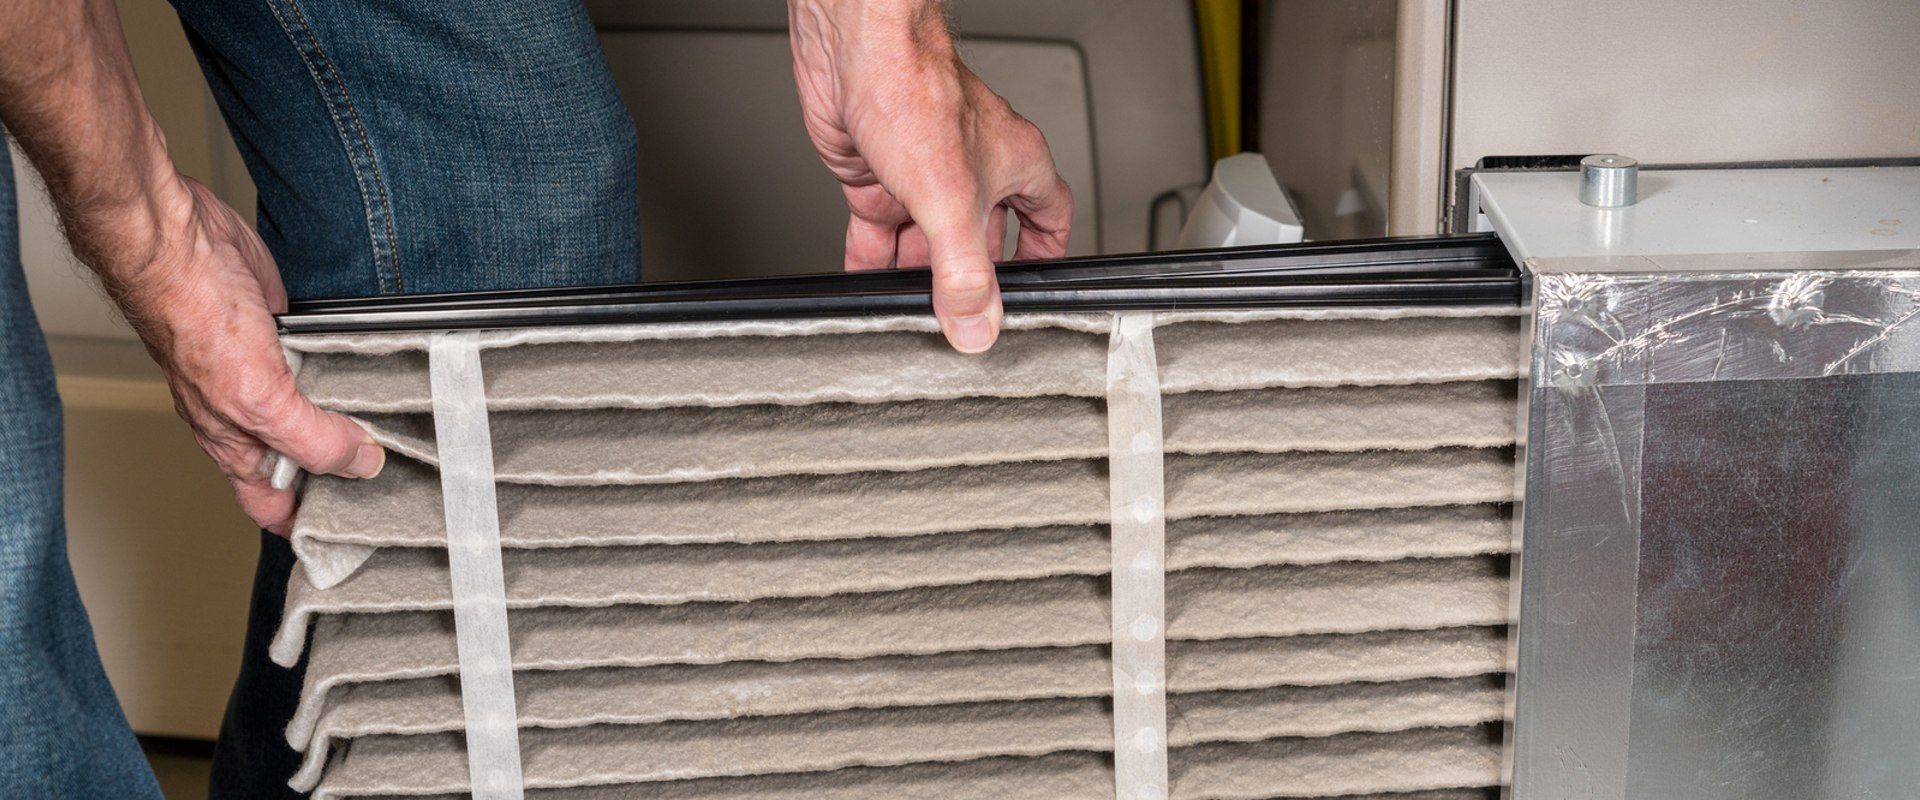 Where to change furnace air filter?